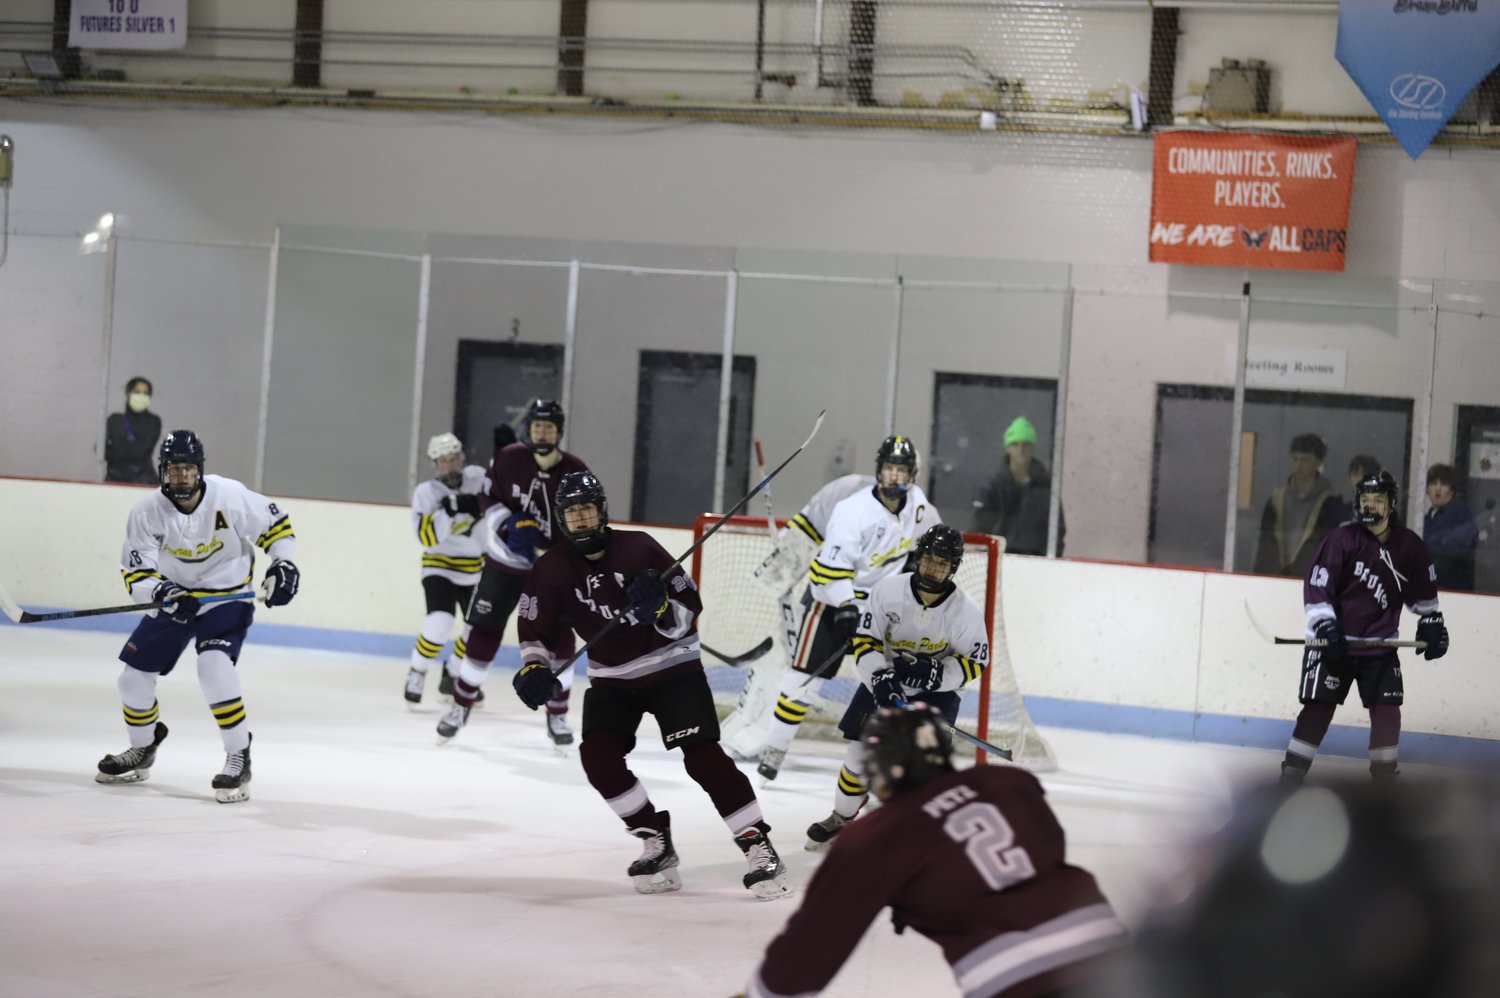 Severna Park won a tight contest, 6-4, against Broadneck on January 23.